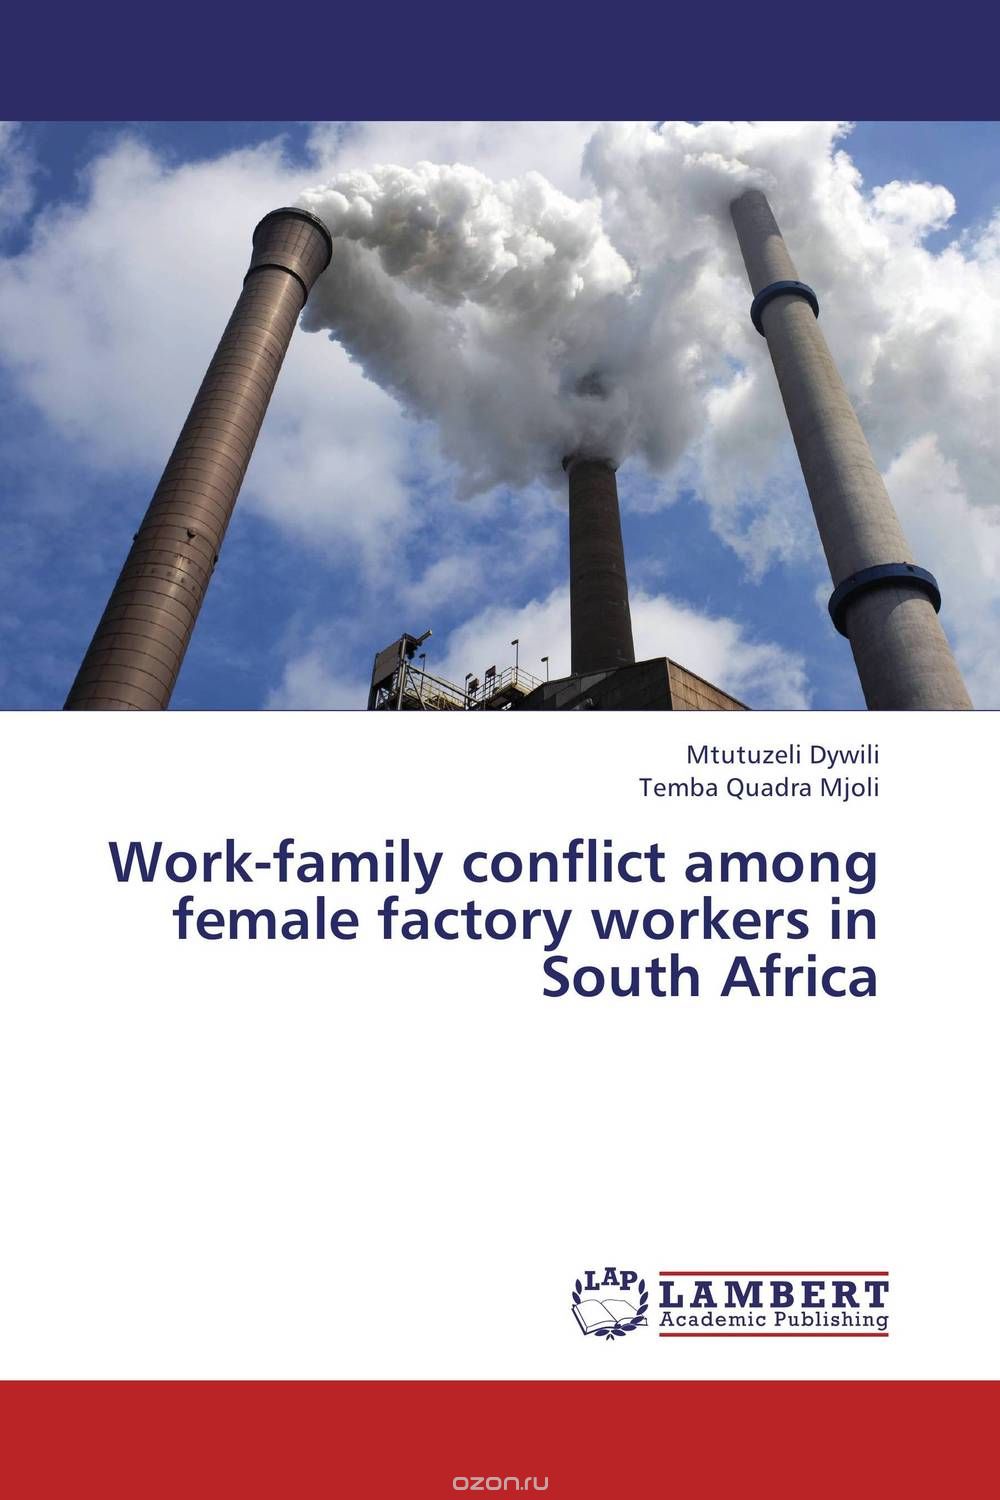 Скачать книгу "Work-family conflict among female factory workers in South Africa"